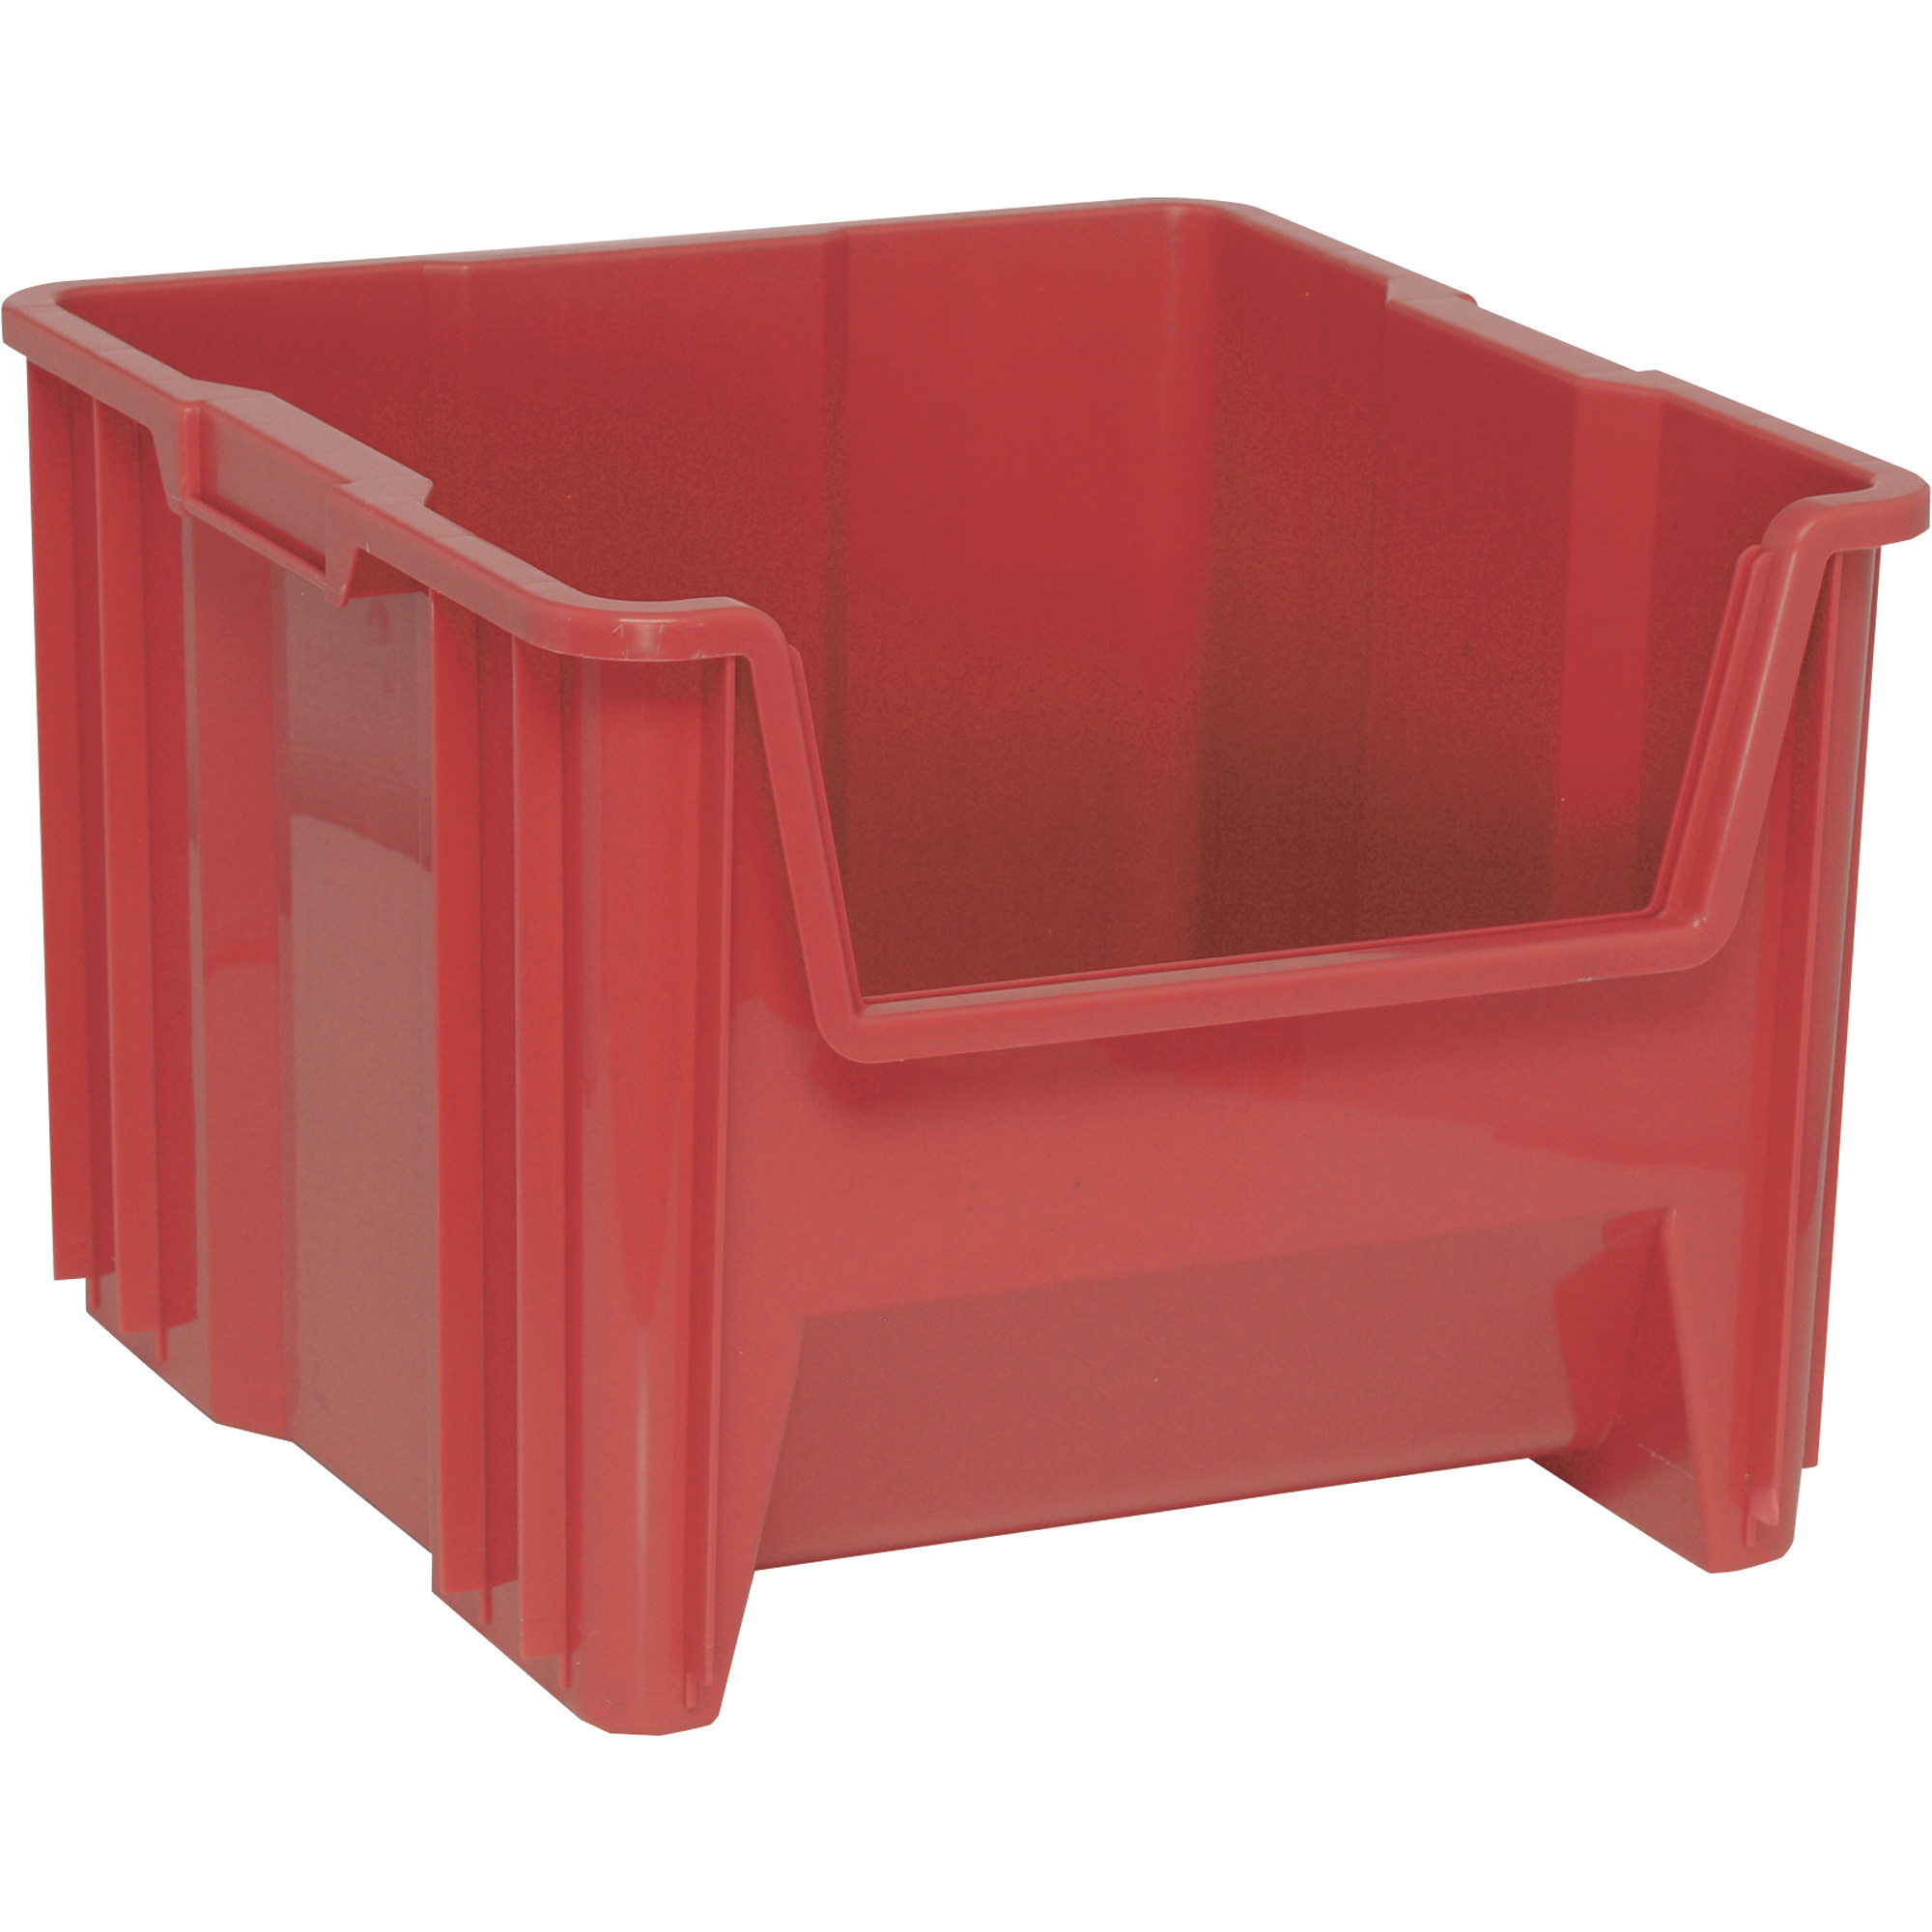 Quantum Storage Giant Stack Container, 2-Pack, 17 1/2Inch L x 16 1/2Inch W x 12 1/2Inch H, Red, Model QGH800RDCS